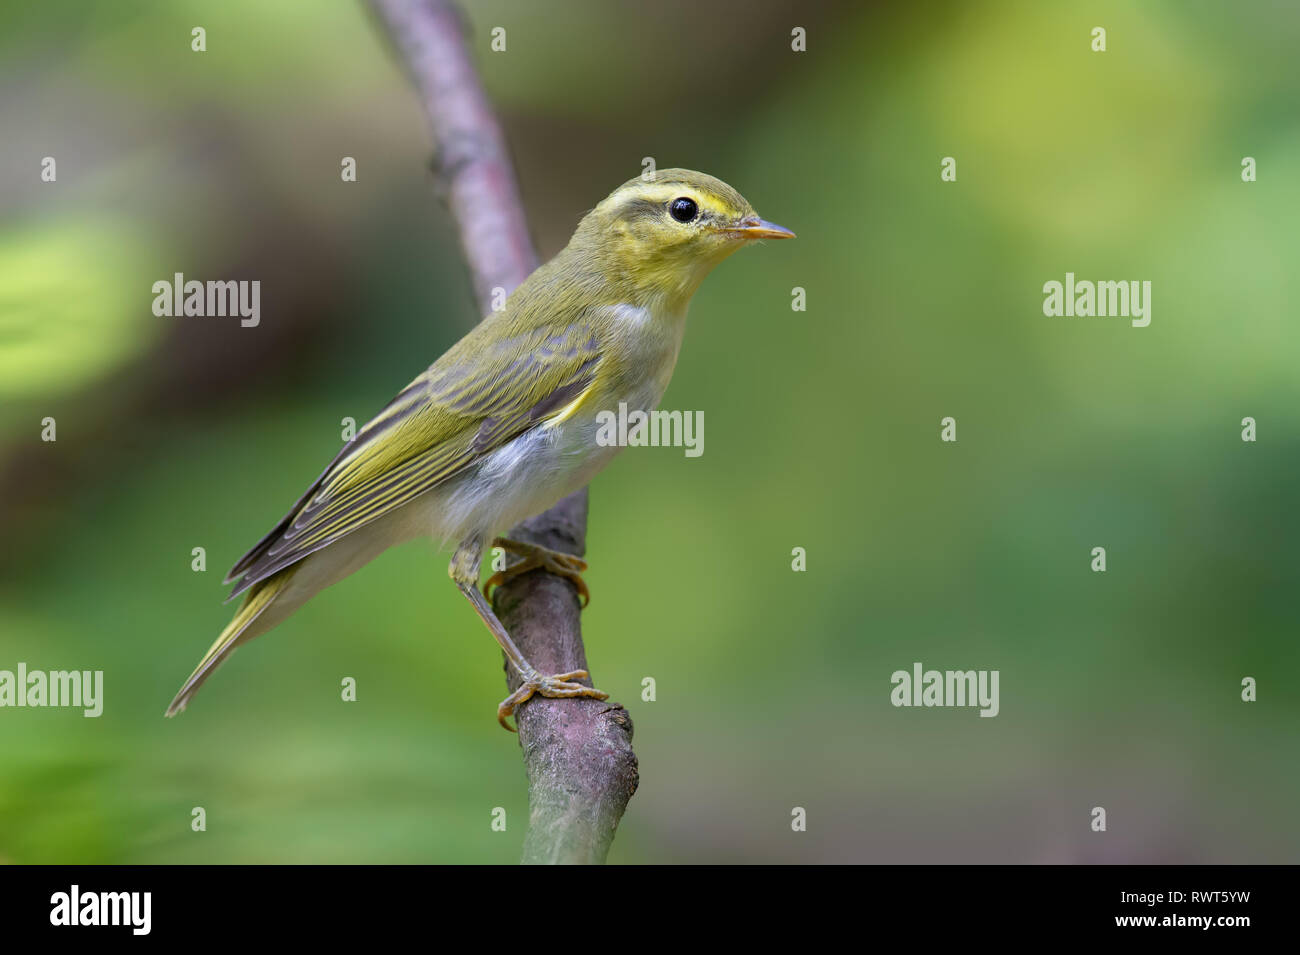 Wood warbler vertical posture on small branch Stock Photo